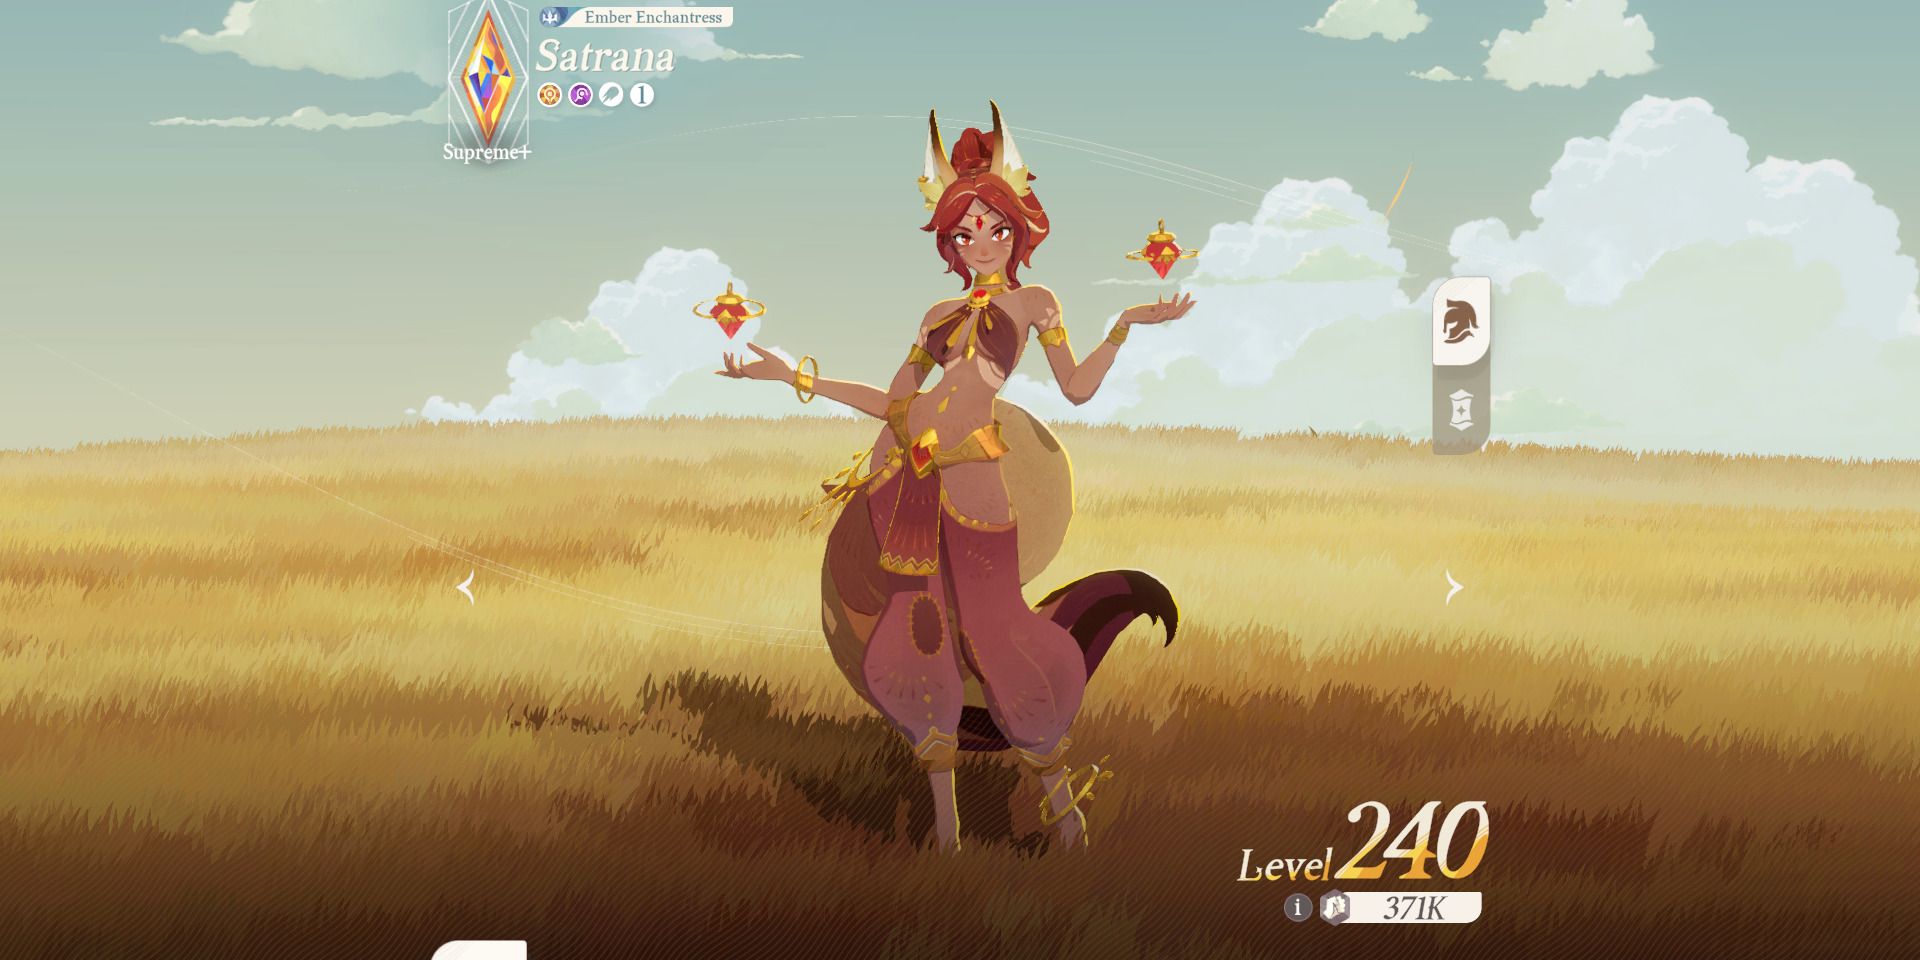 Image of the mage character Satrana in AFK Journey